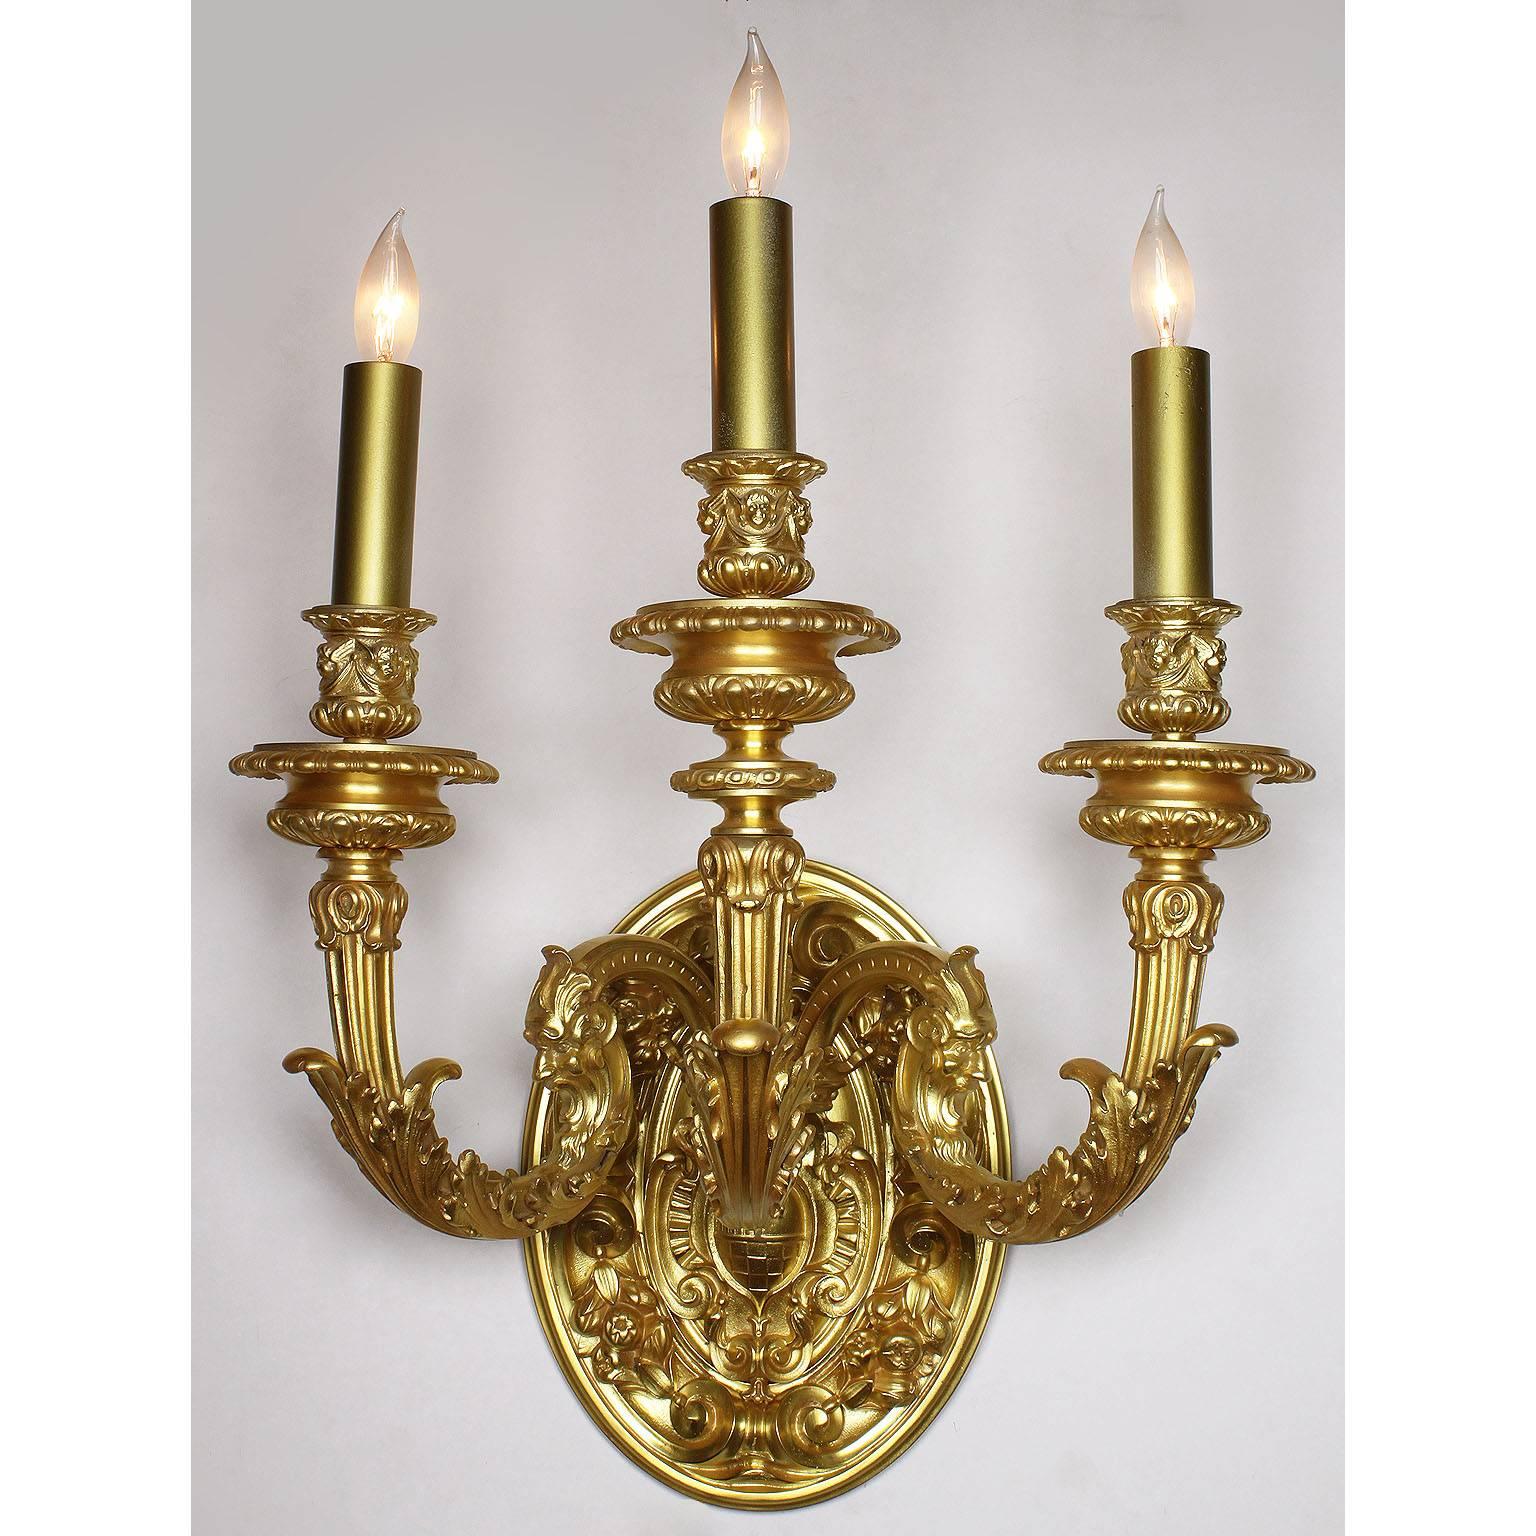 The Spelling Manor's dining-room wall-lights. A very fine pair of French 20th century Louis XV style gilt bronze figural three-light wall sconces, each with a circular coat-of-arms backplate centered with a Royal shield and relief details of fruits,